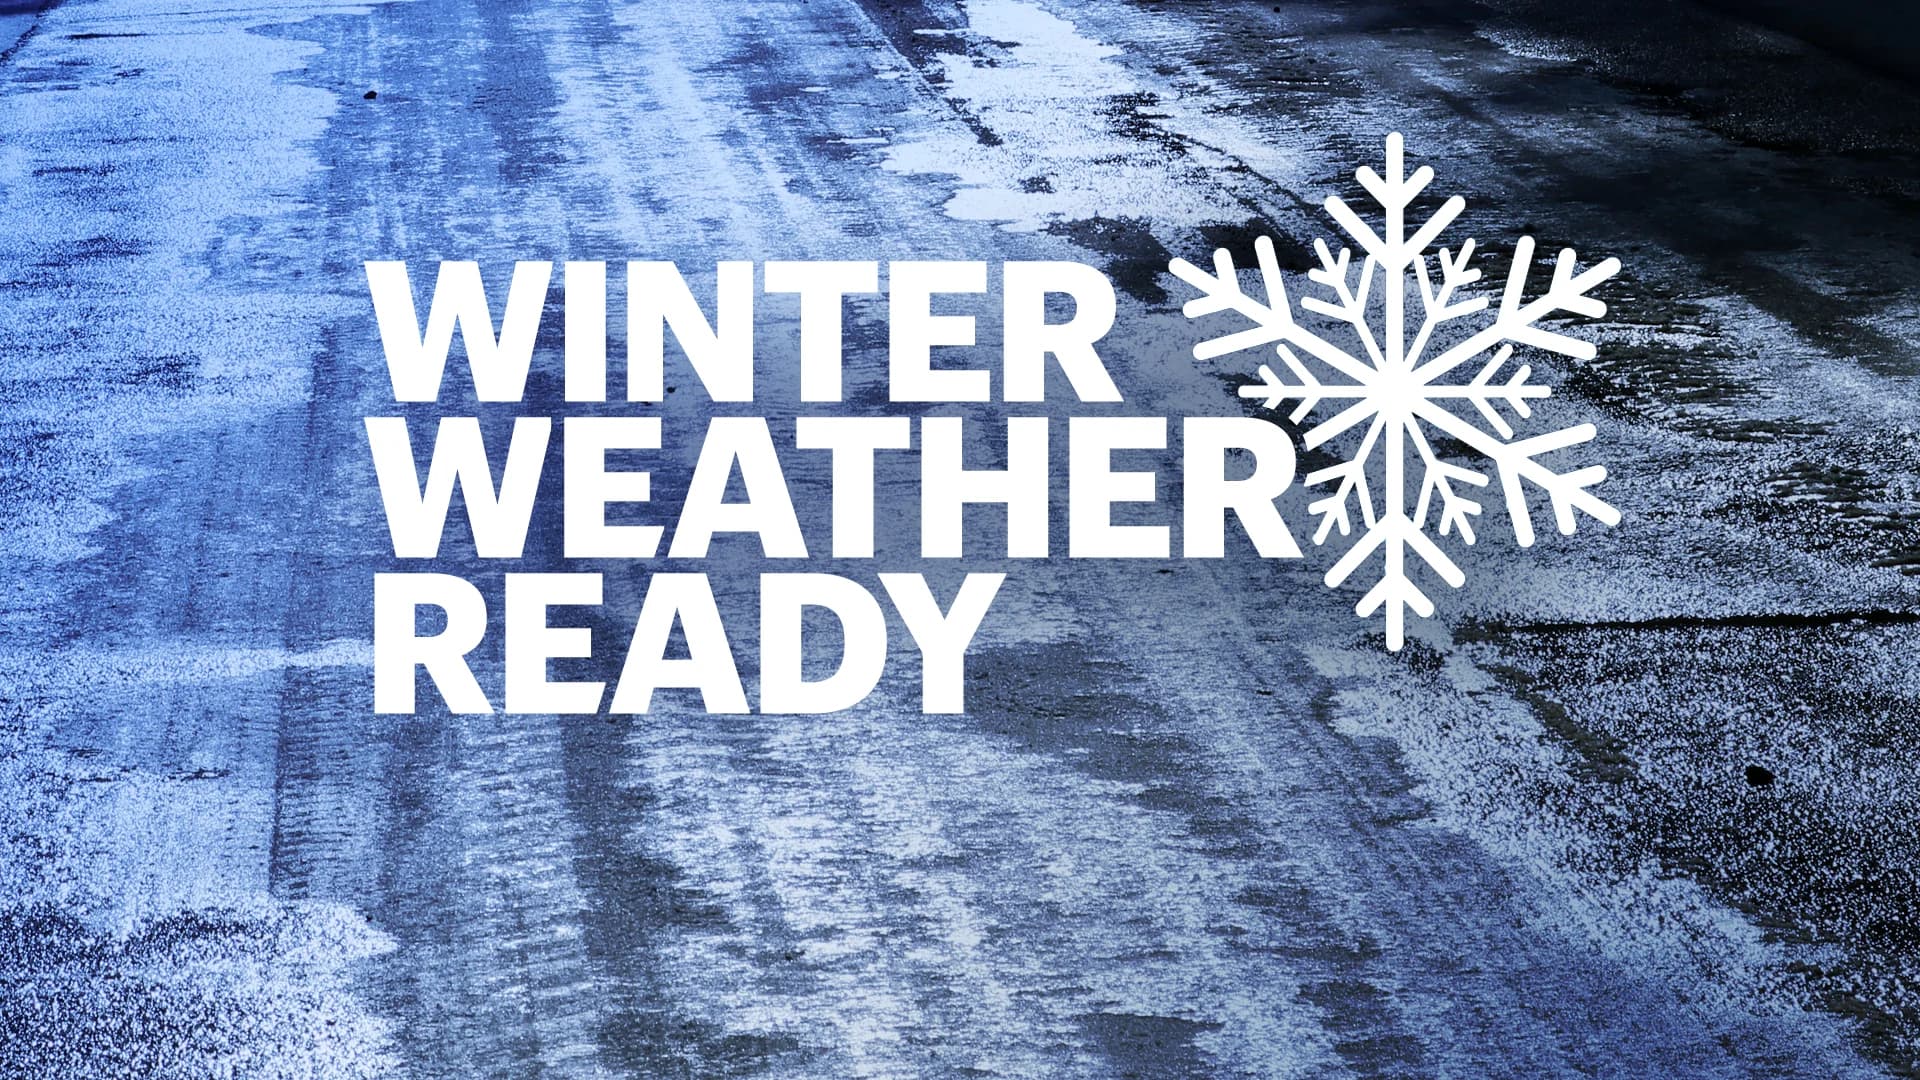 Are you Winter Weather Ready?